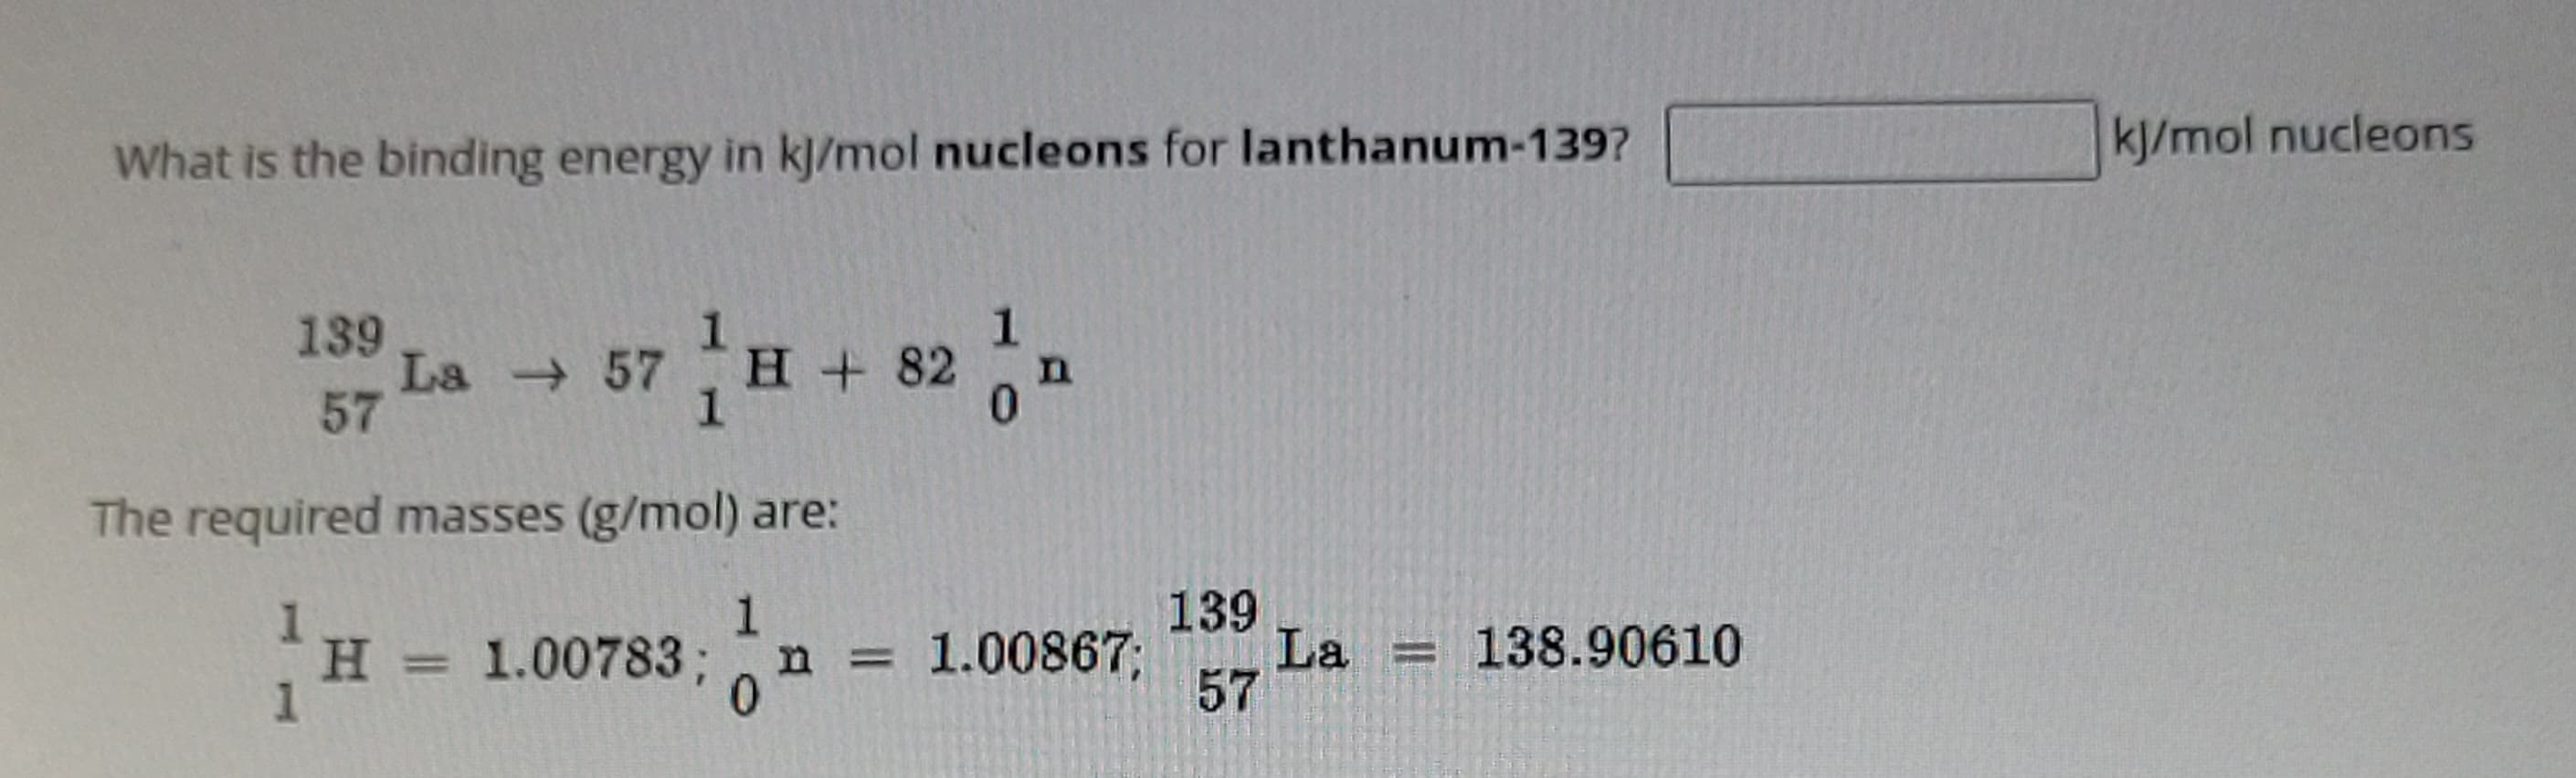 What is the binding energy in kj/mol nucleons for lanthanum-139?
139
57
La → 57 H + 82
1
1
0
n
The required masses (g/mol) are:
1
H
H = 1.00783; n = 1.00867; La = 138.90610
0
139
57
kJ/mol nucleons